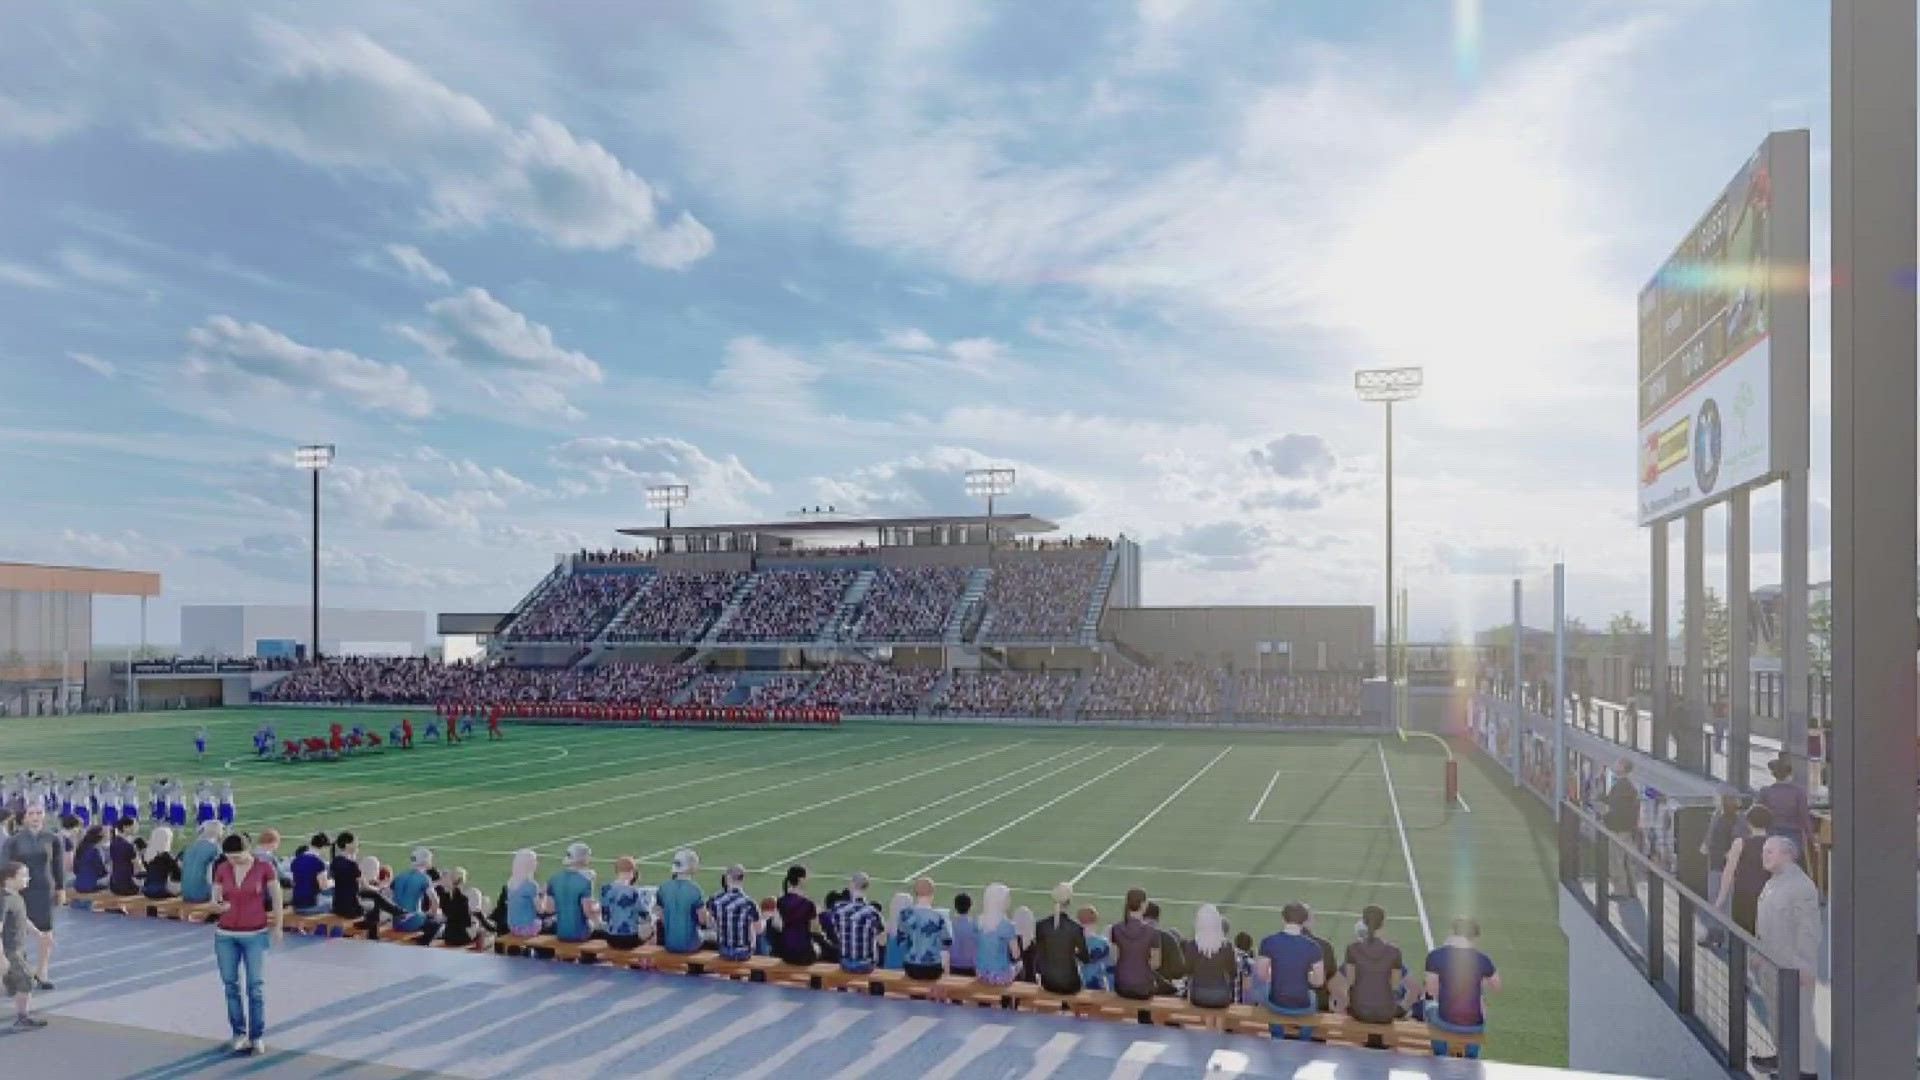 A USL women's team has been announced in Spokane, and their first games are planned for 2024.